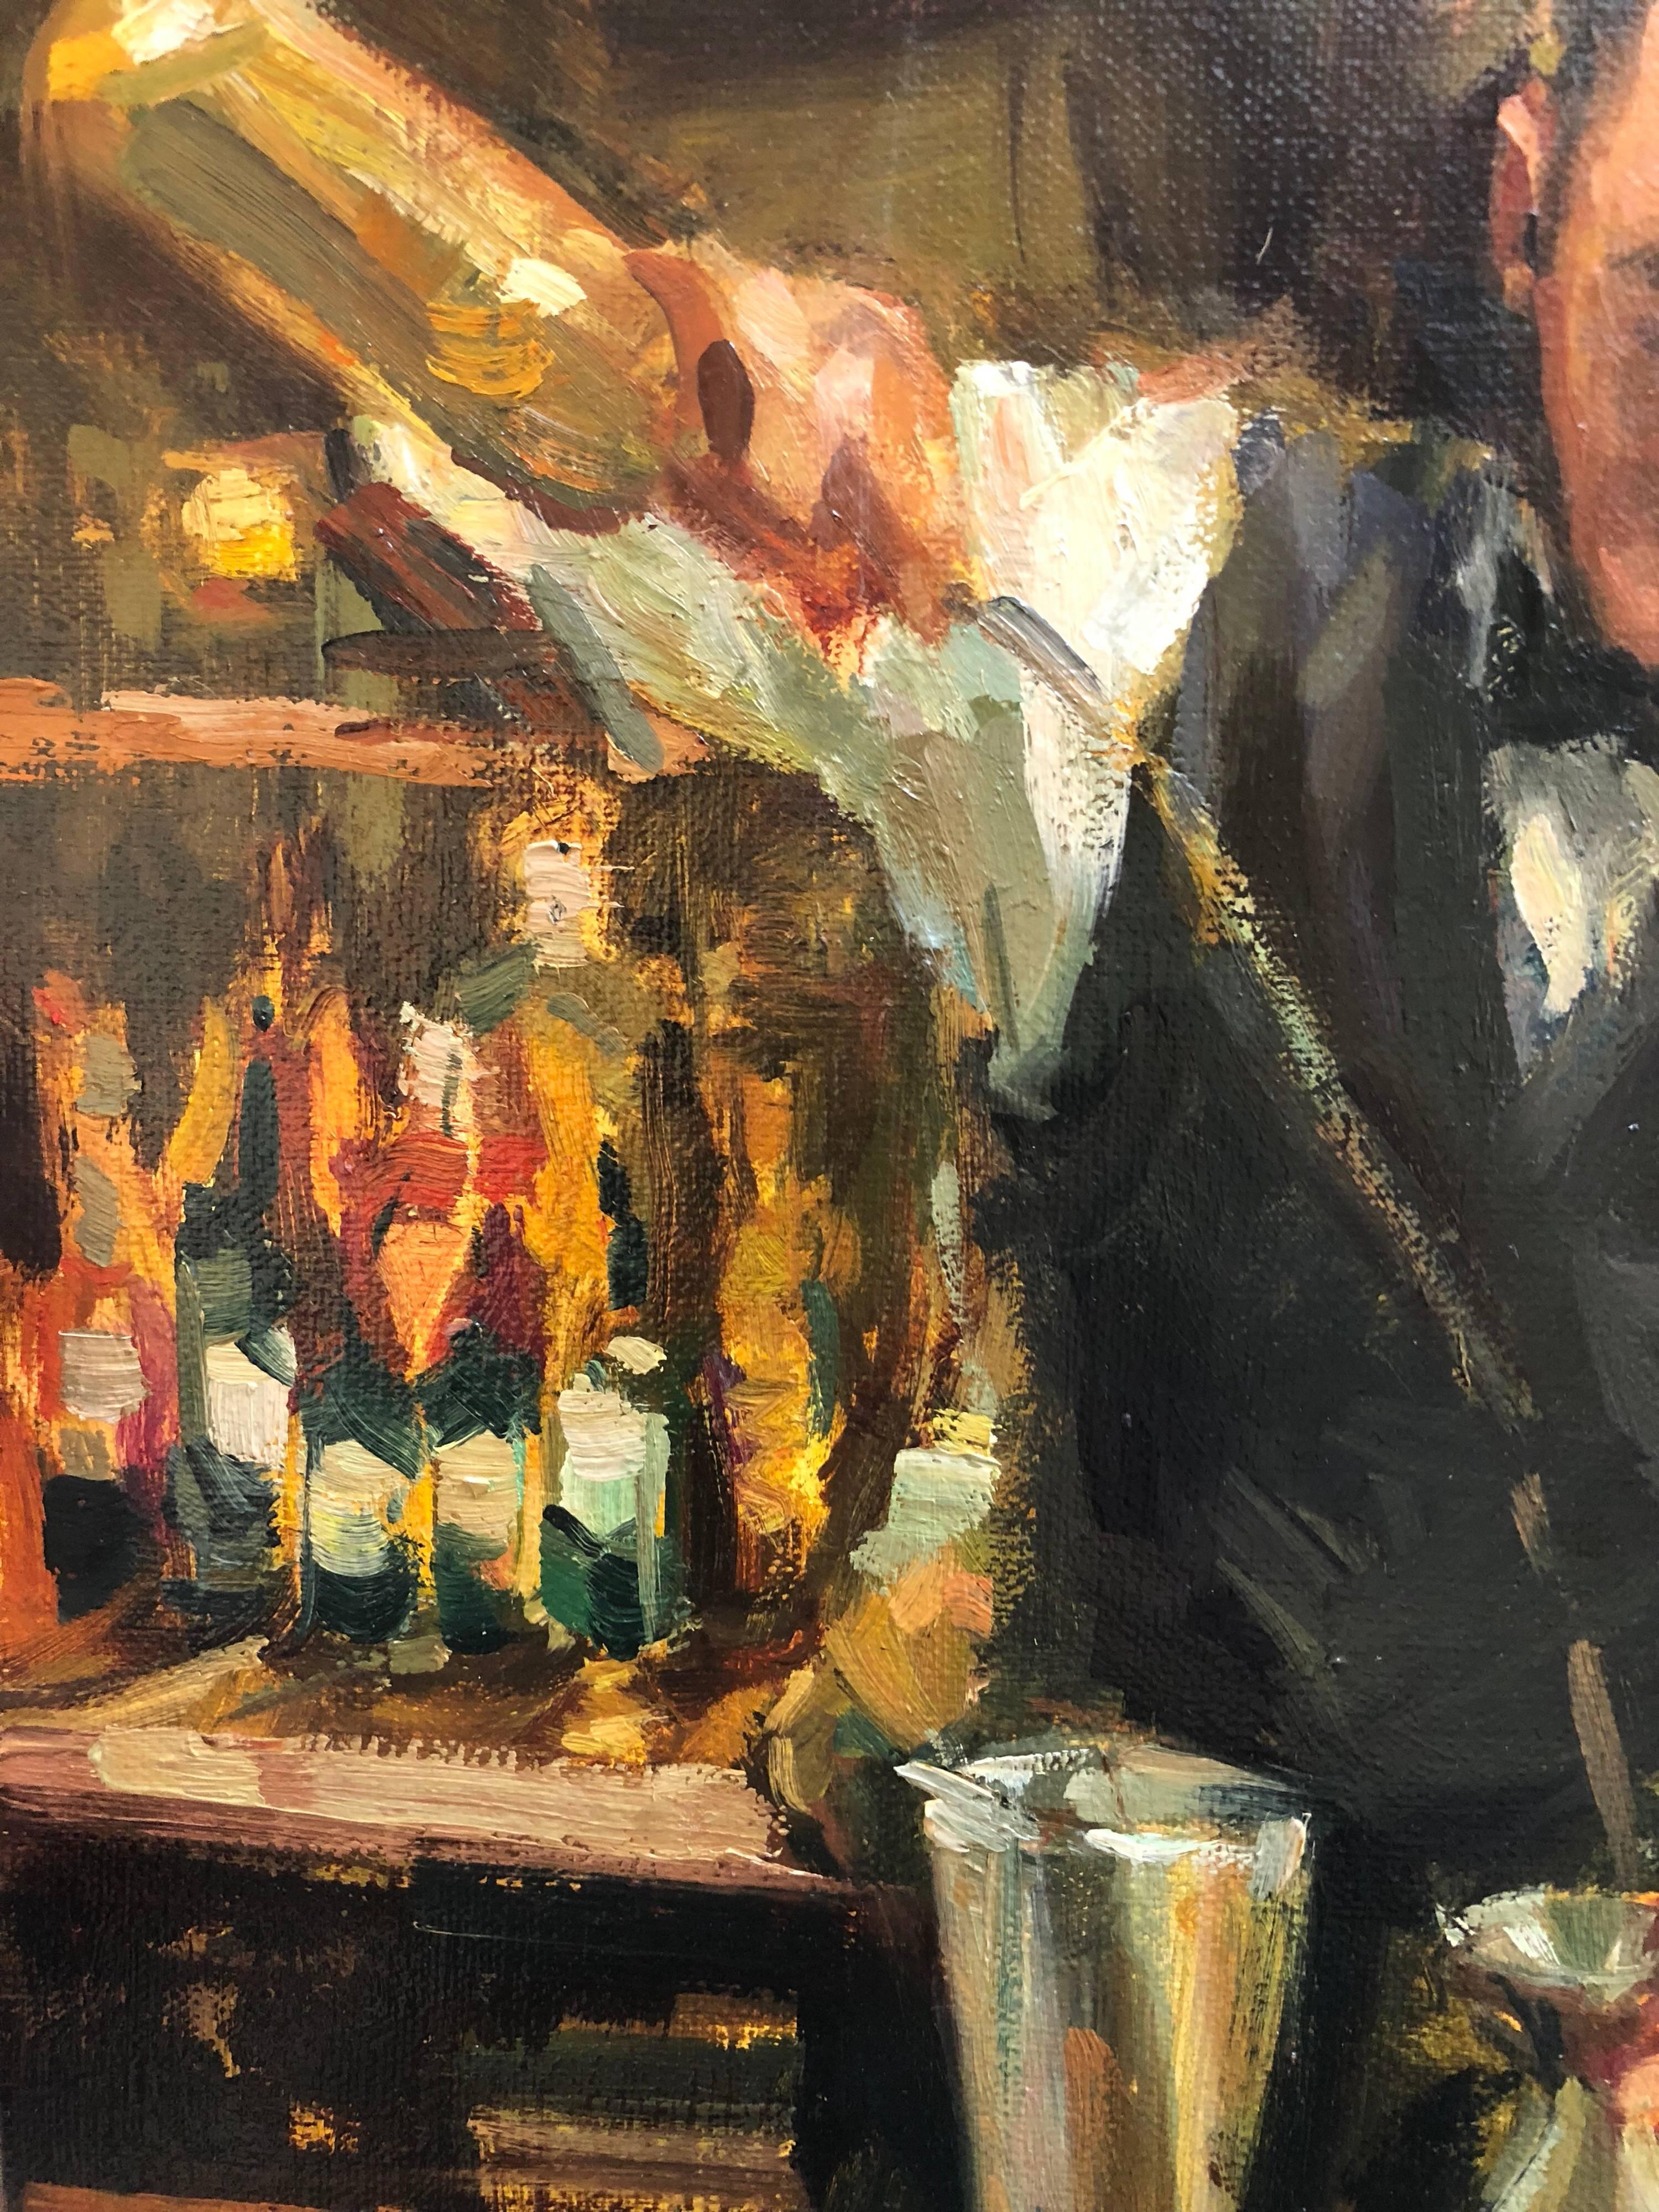 Dirty Martini - Brown Figurative Painting by Eli Cedrone